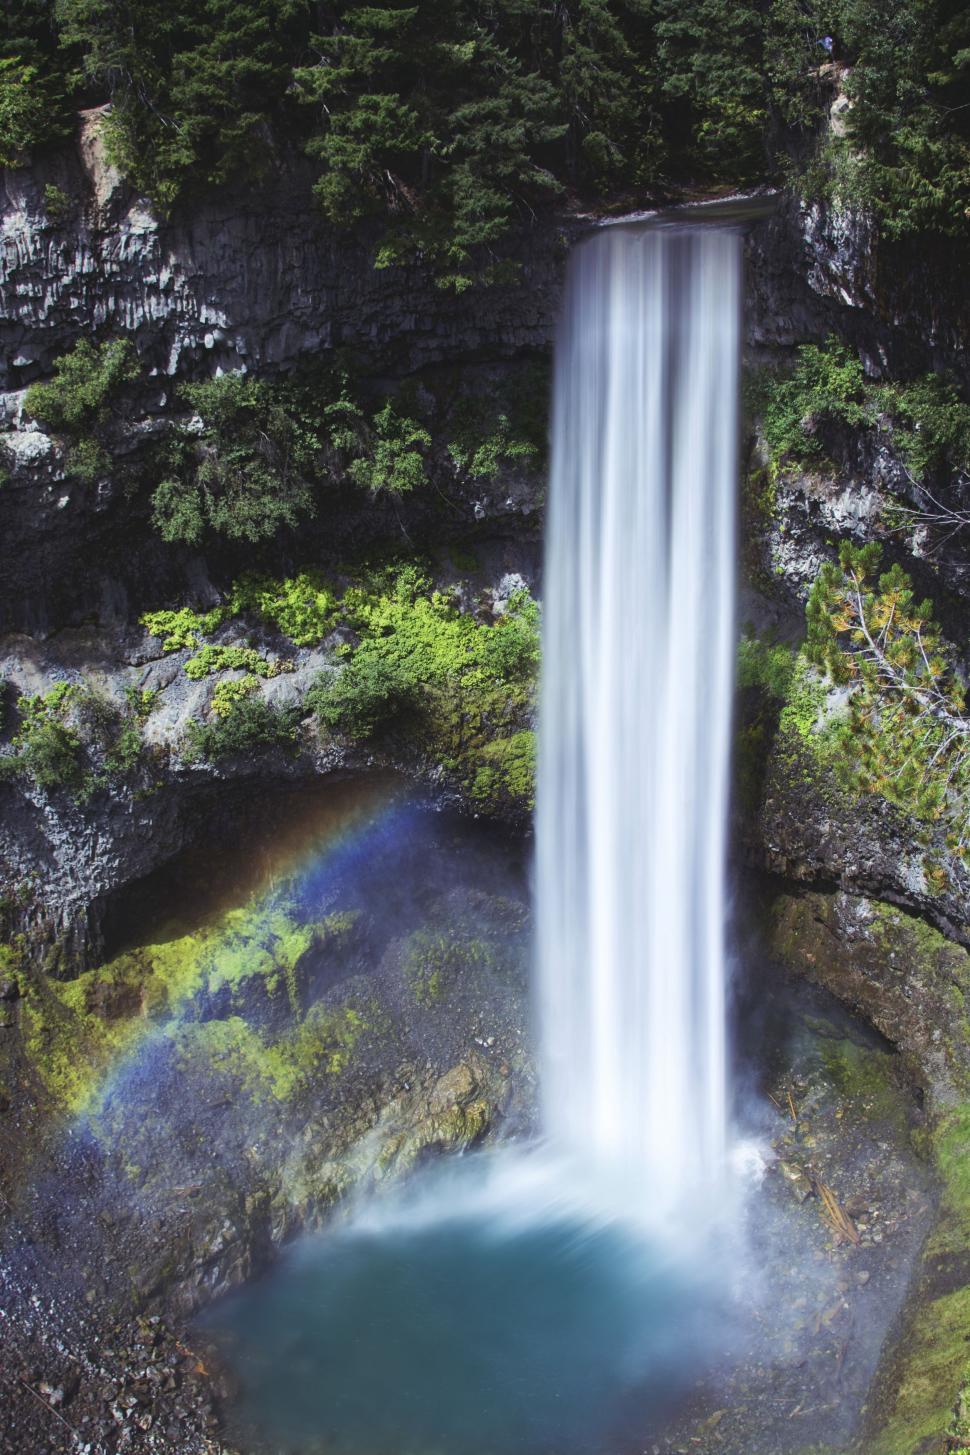 Free Image of Majestic Waterfall With Blue Pool 